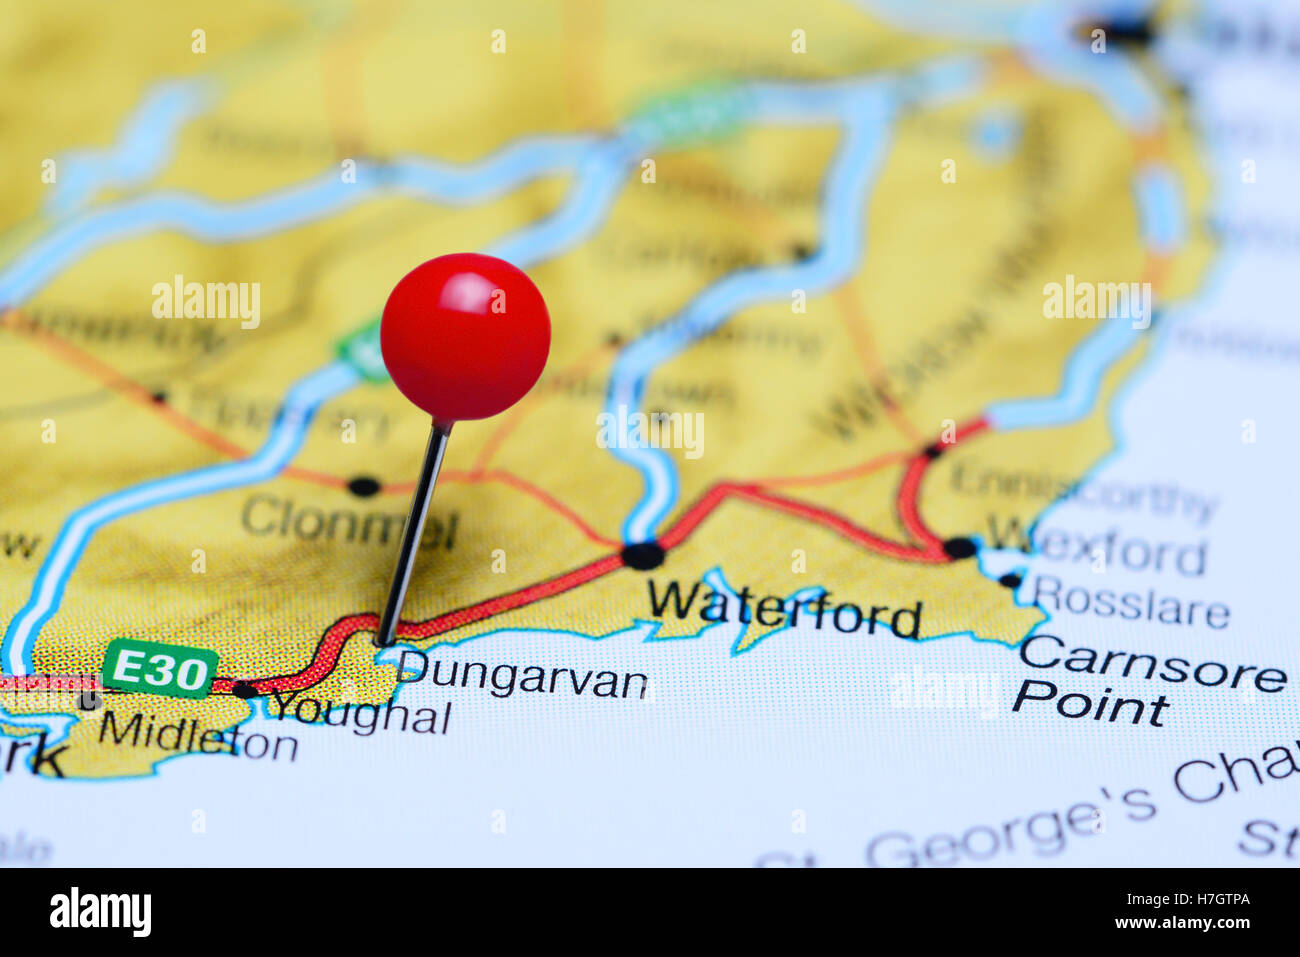 Dungarvan pinned on a map of Ireland Stock Photo